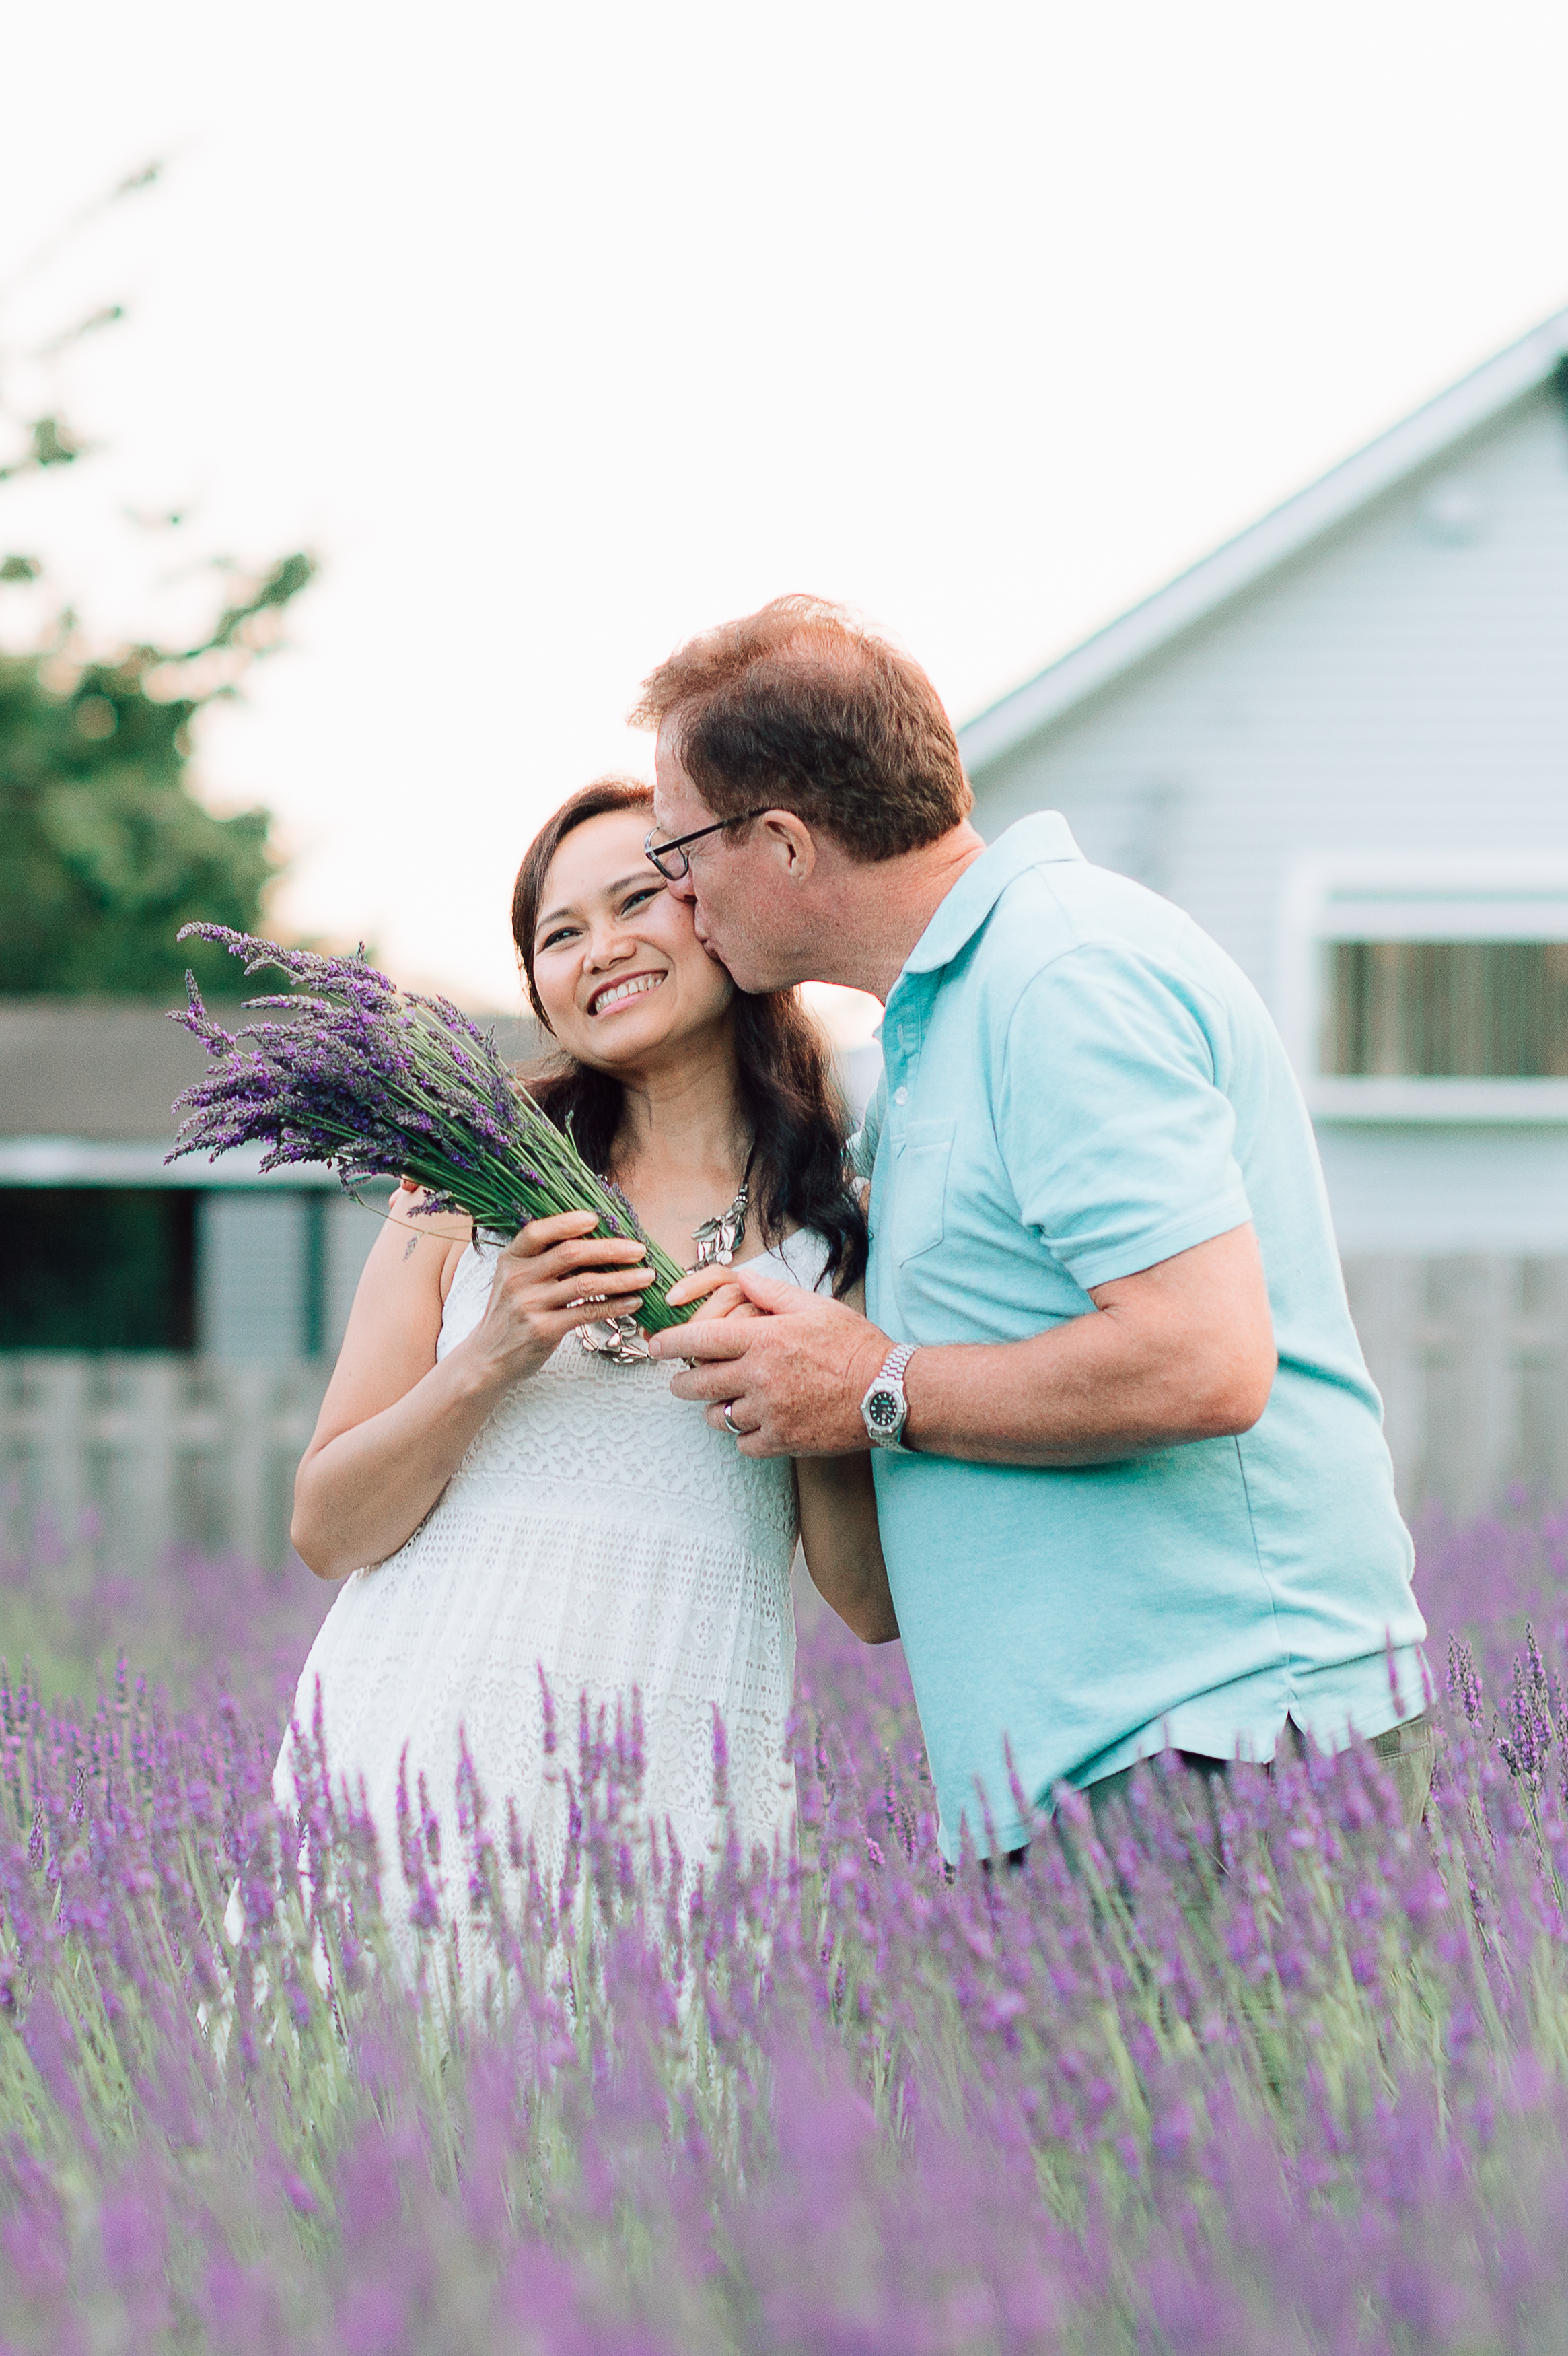 engagement_lavenderfield_youseephotography_LidiaOtto (42).jpg